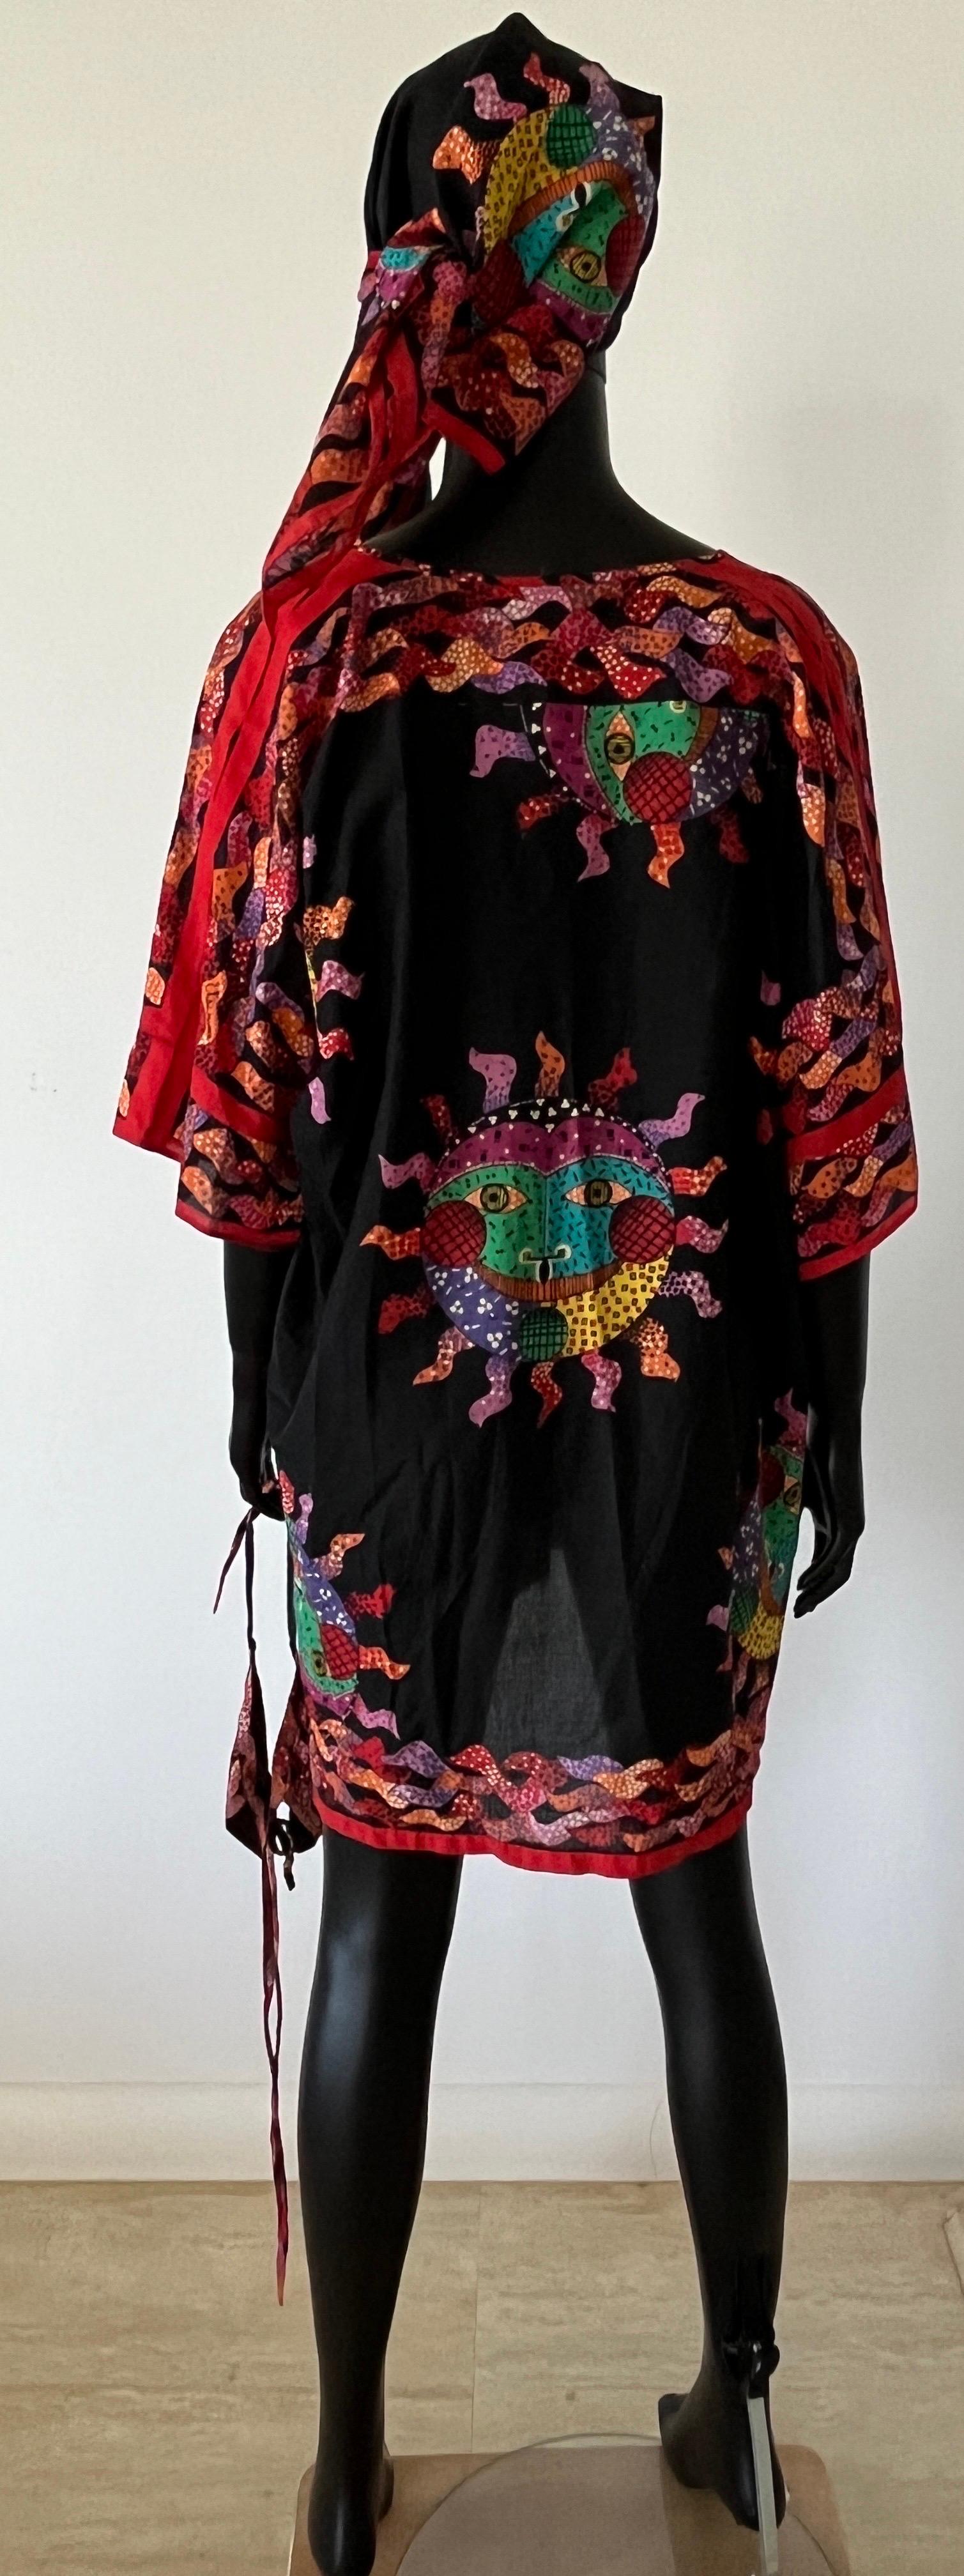 Vintage 1970's Valditeverre kaftan set, including a bikini top, square scarf and kaftan.

The kaftan is printed with a unique print that runs through the whole set and is the ultimate 70's resort piece, with split sleeve detail that shows at the top